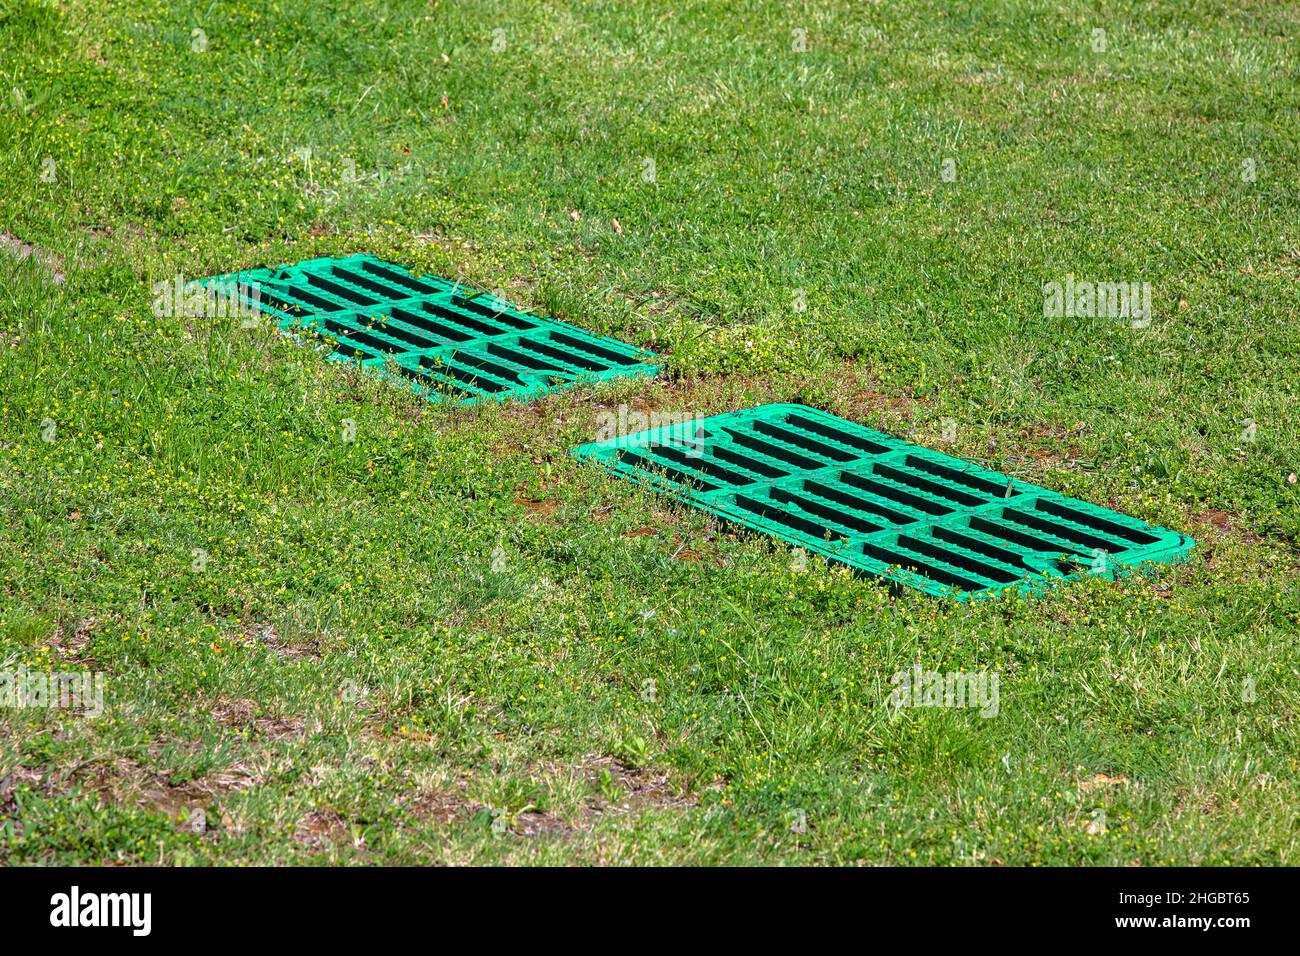 catch basin grate drainage on the lawn with green grass septic tank cover, two rectangular green eco hatches sump cesspool drainage system environment Stock Photo